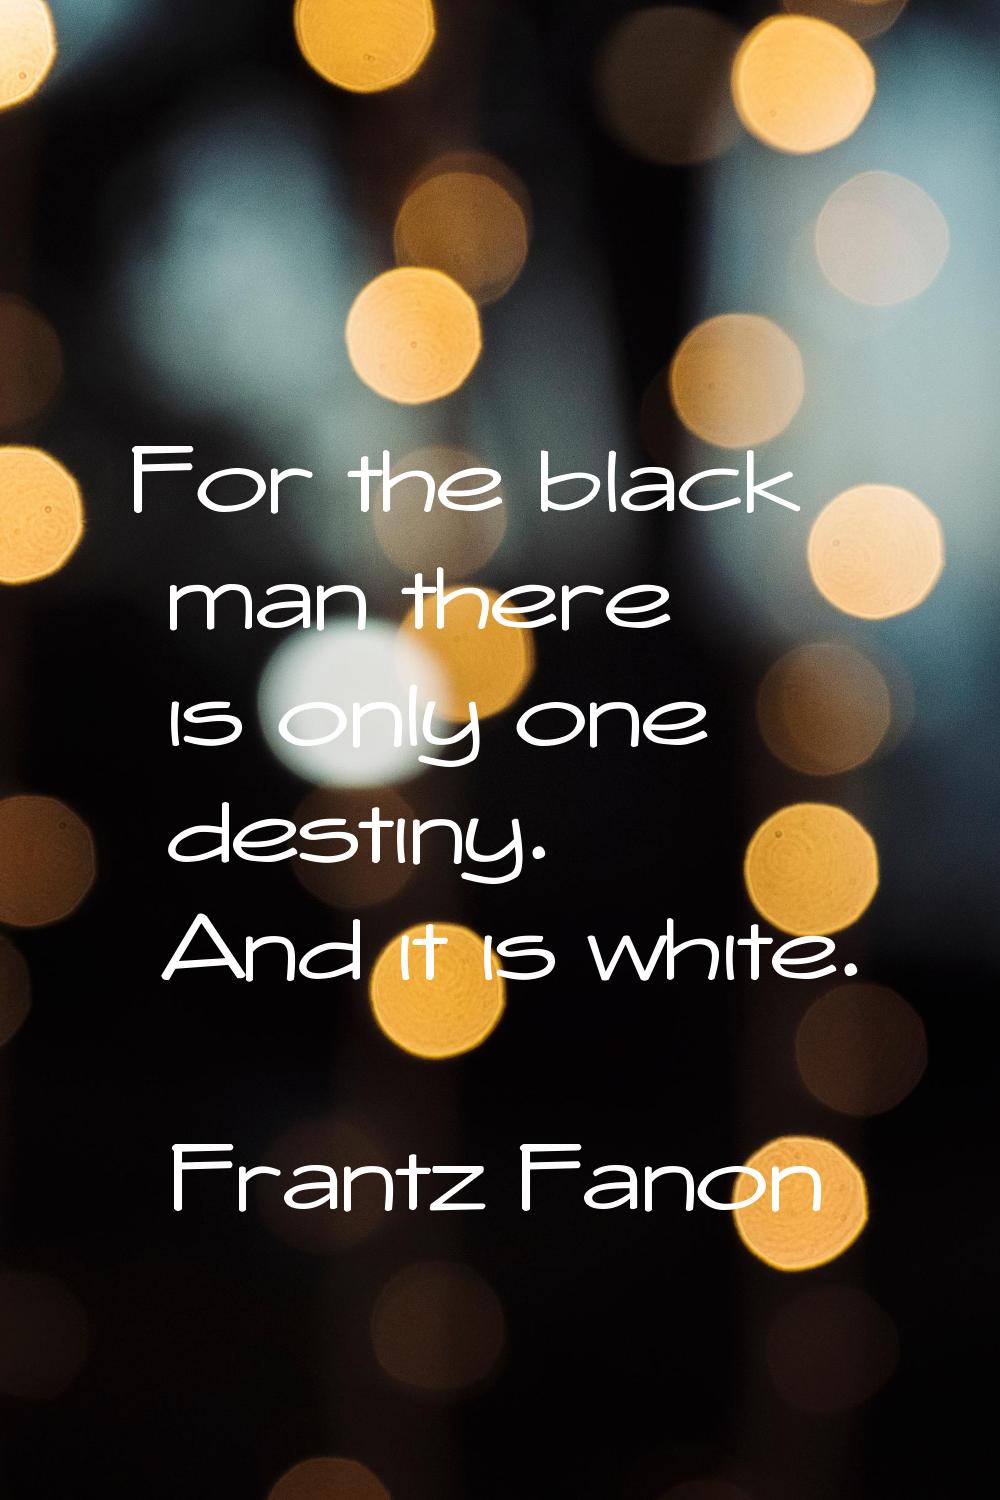 For the black man there is only one destiny. And it is white.